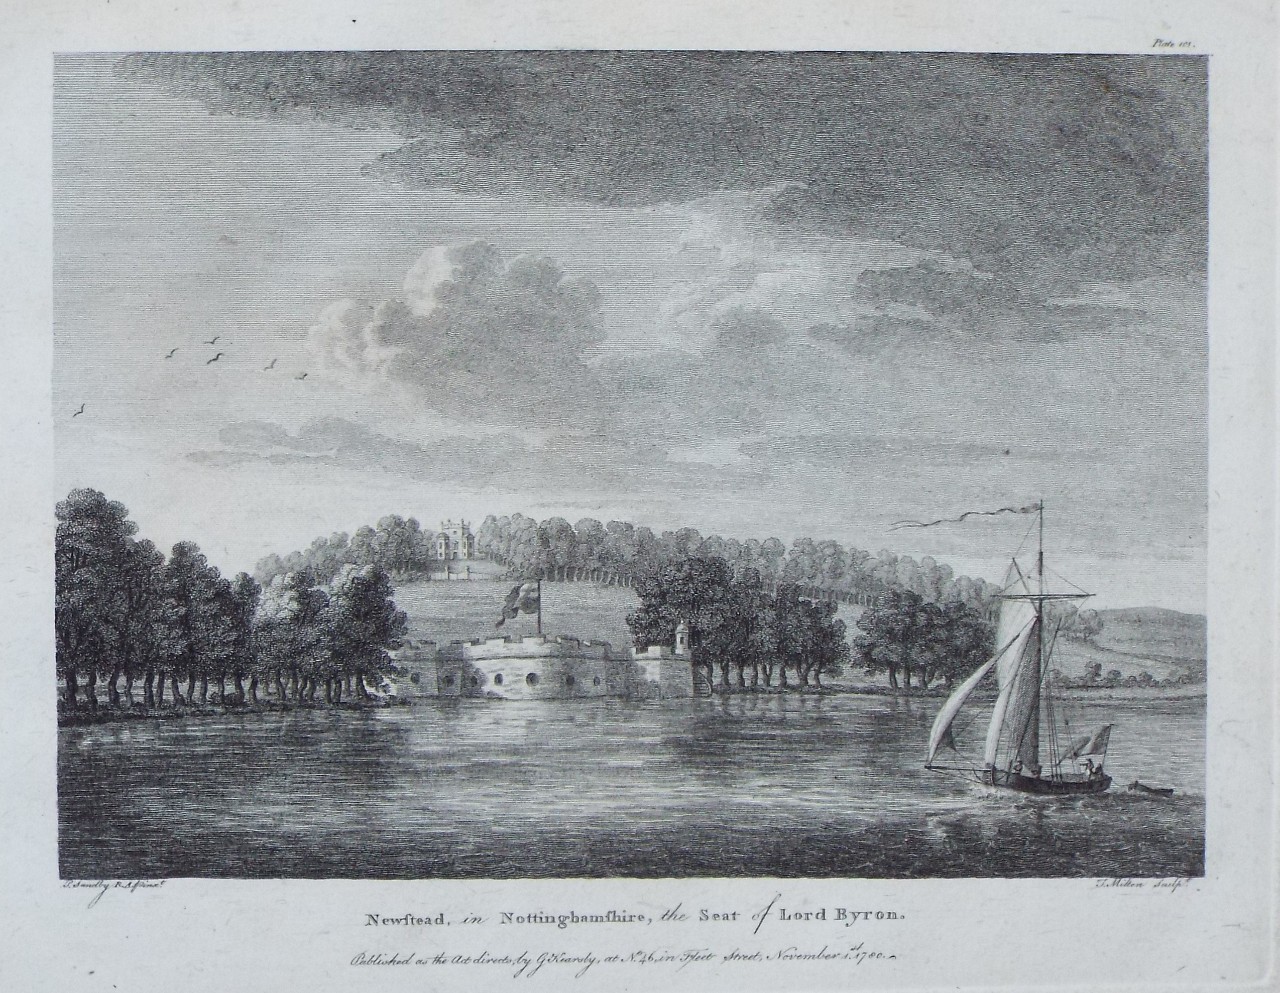 Print - Newstead in Nottinghamshire, the Seat of Lord Byron. - Milton